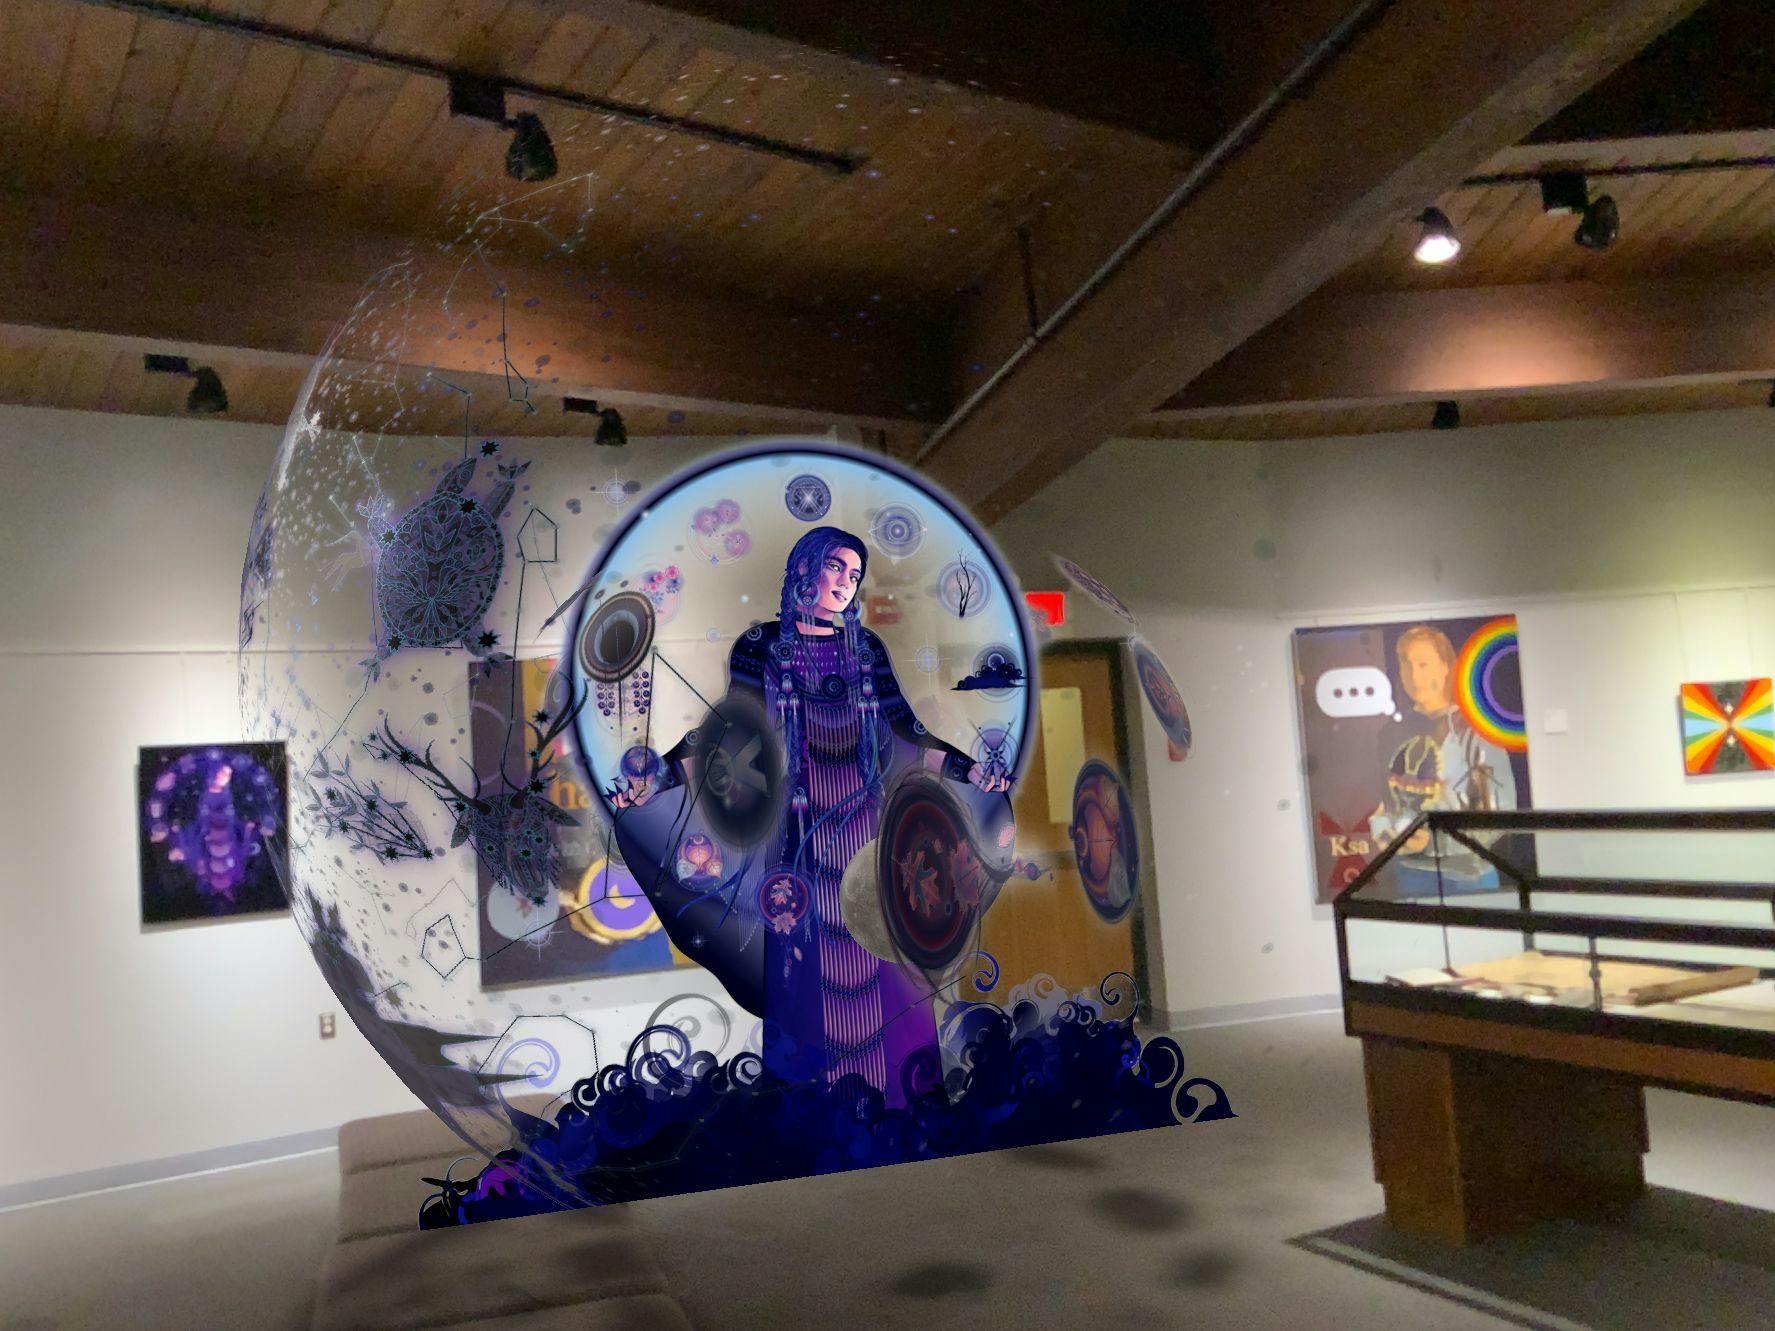 In a gallery with white walls and a wooden beamed ceiling, a virtual projection seems to hover in space amidst the other physical artworks. The Augmented Reality rendering depicts the Dakota moon spirit Hanwi in purple dress, in front of a large lunar calendar.